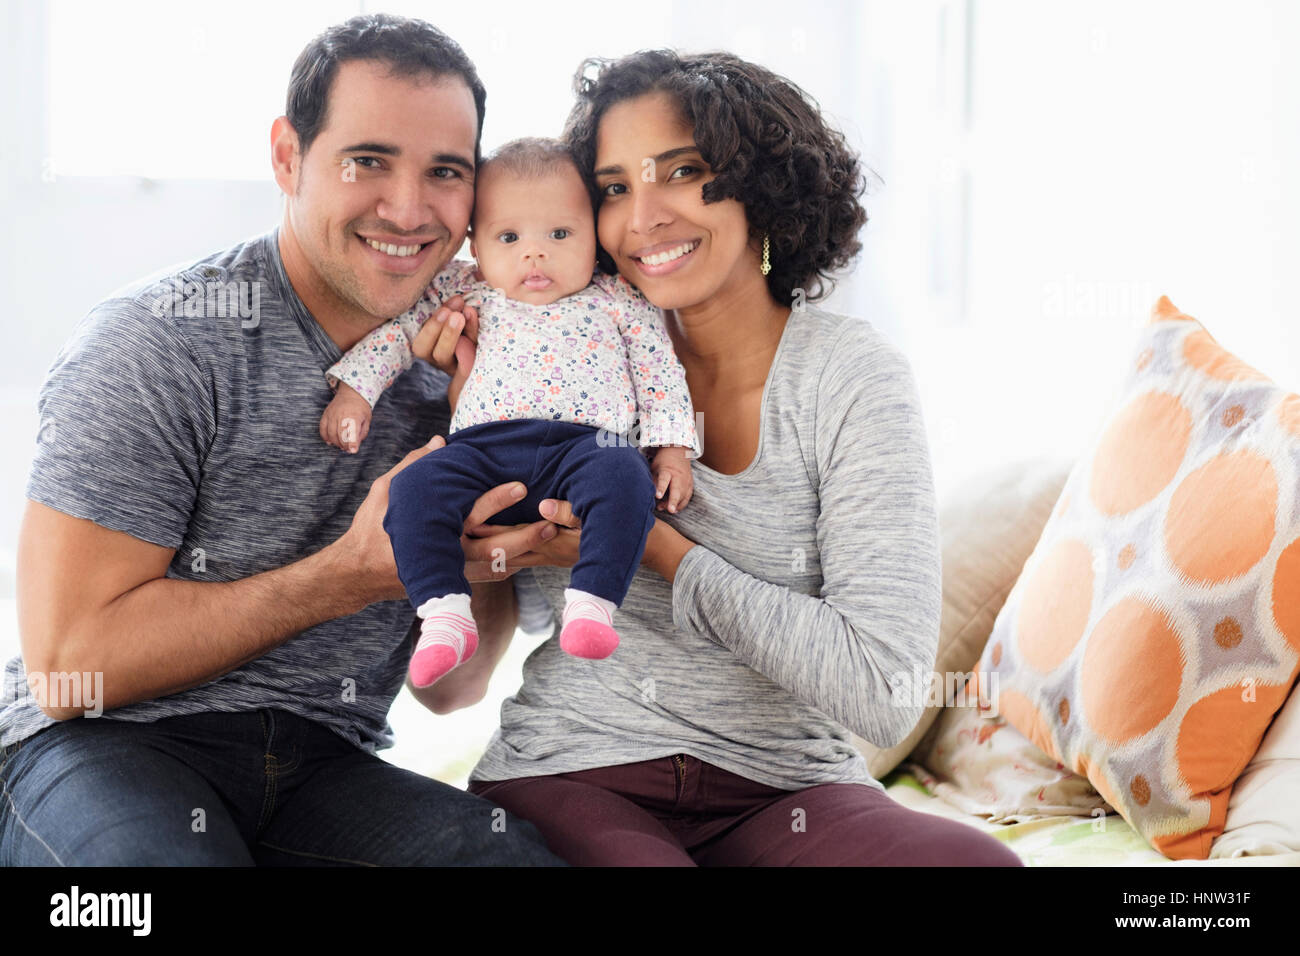 Hispanic mother and father posing with baby daughter Stock Photo